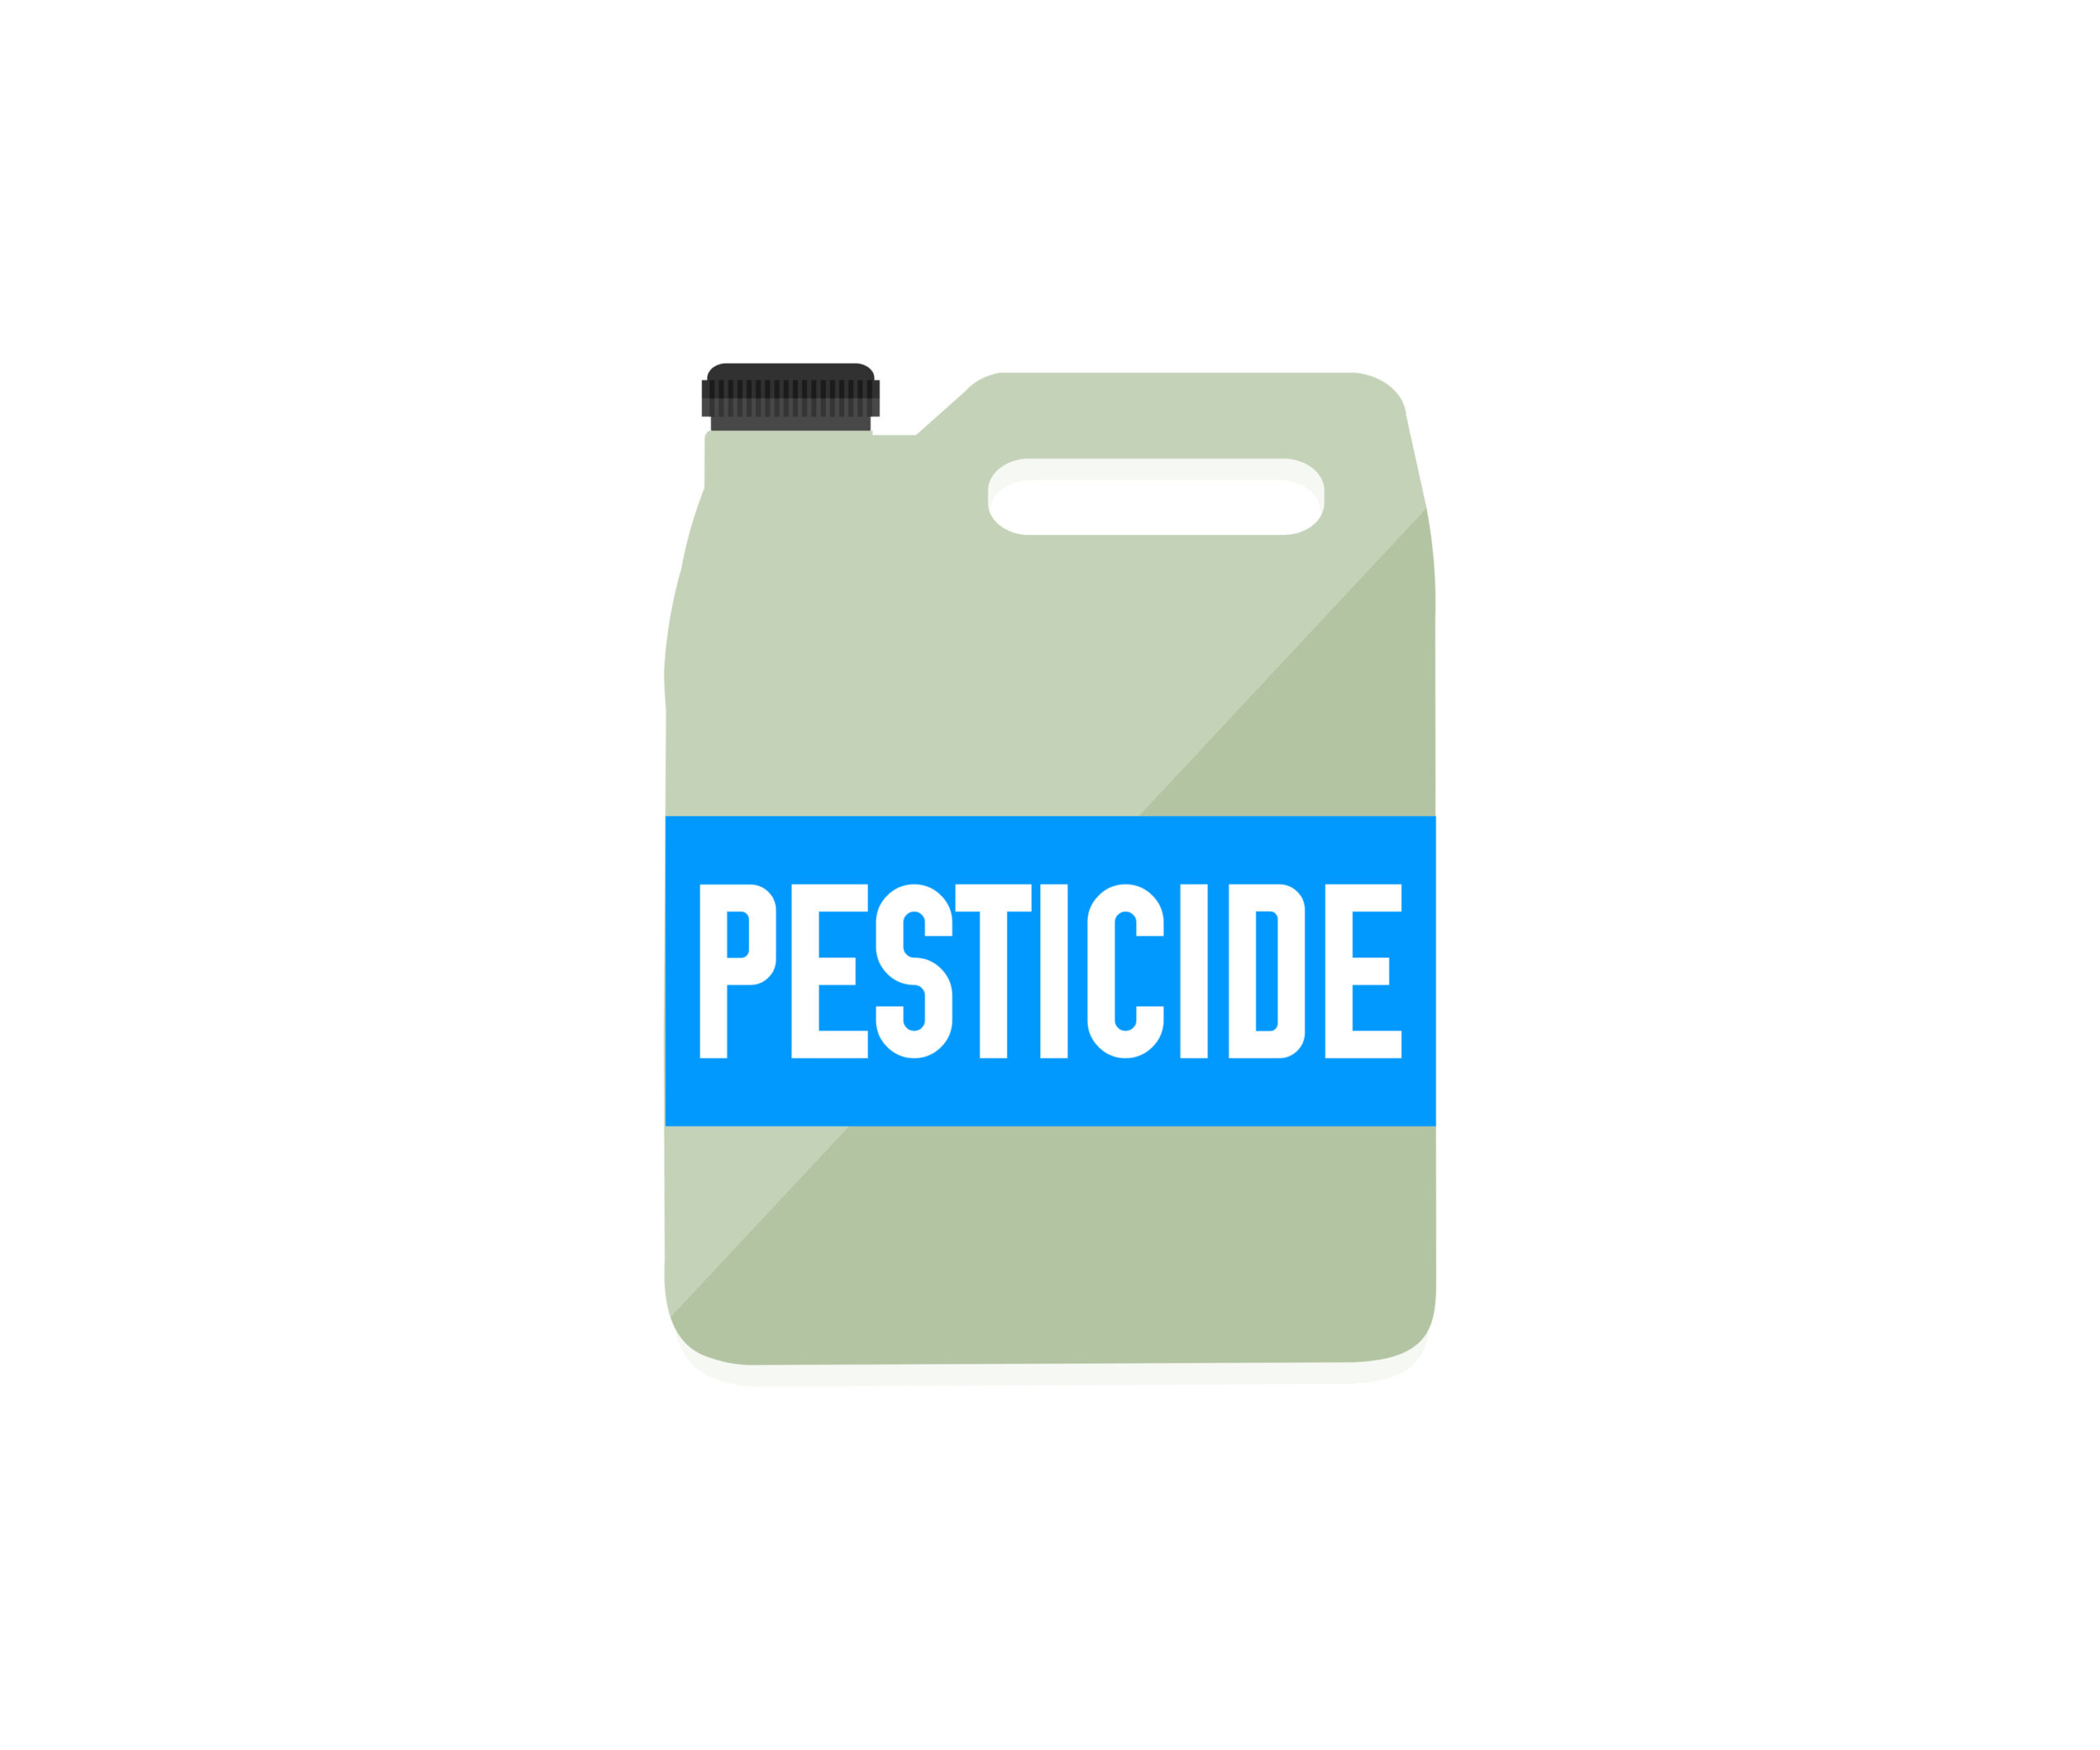 Study Says Pesticide Exposure May Increase the Risk of Neurodevelopmental Disorders